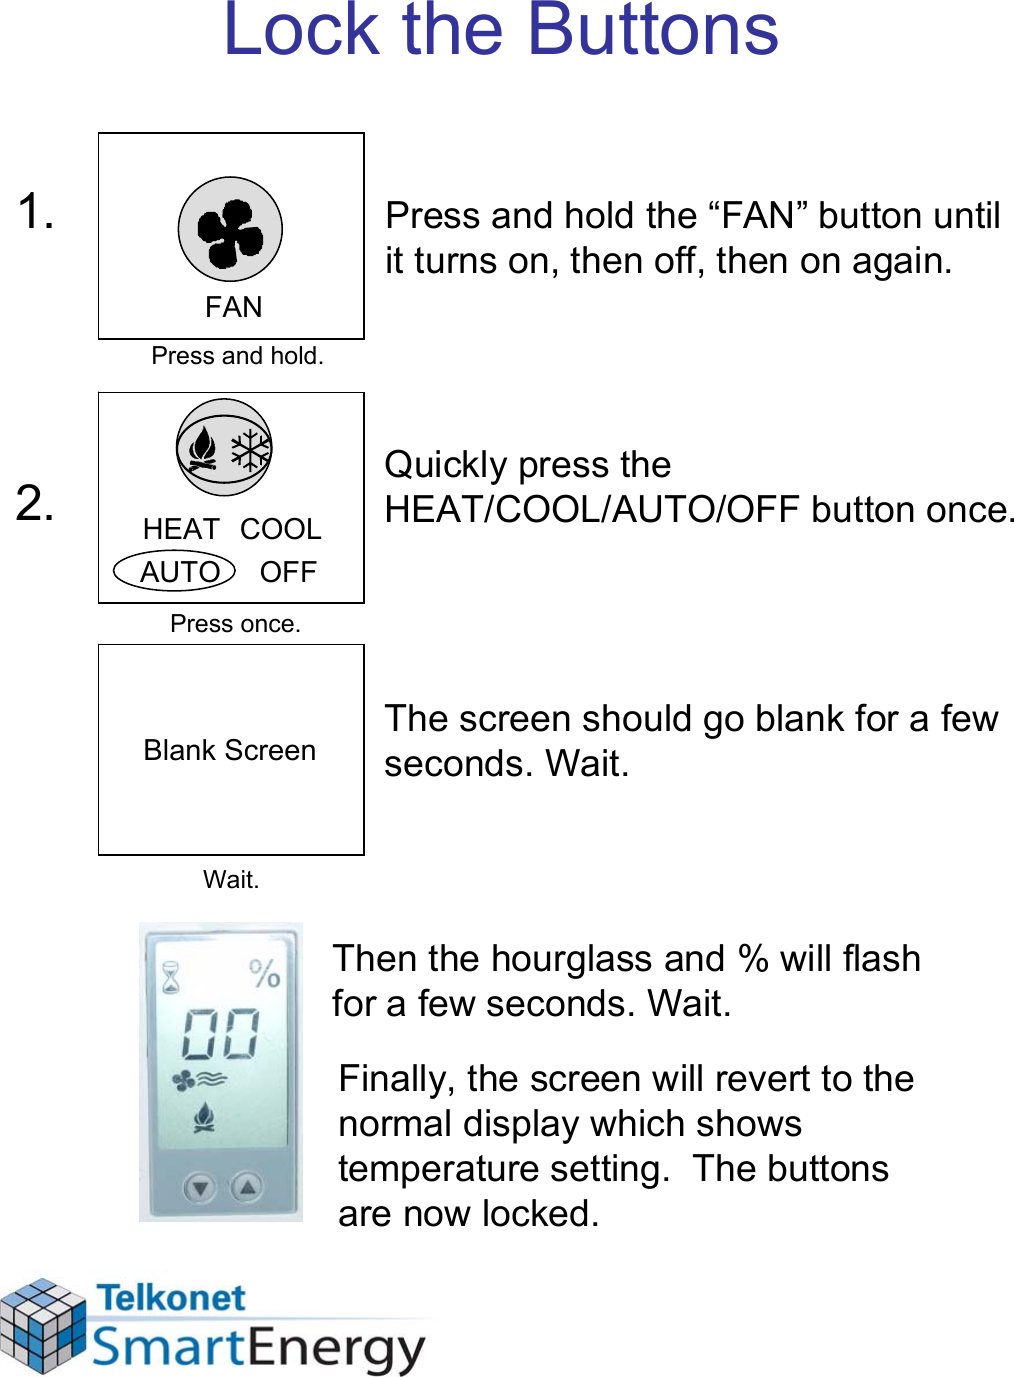 Lock the ButtonsThe screen should go blank for a few seconds. Wait. Then the hourglass and % will flash for a few seconds. Wait.Finally, the screen will revert to the normal display which shows temperature setting.  The buttons are now locked.Press and hold the “FAN” button until it turns on, then off, then on again.Quickly press the HEAT/COOL/AUTO/OFF button once.FANHEAT  COOLAUTO     OFF1.2.Press and hold.Press once.Wait.Blank Screen